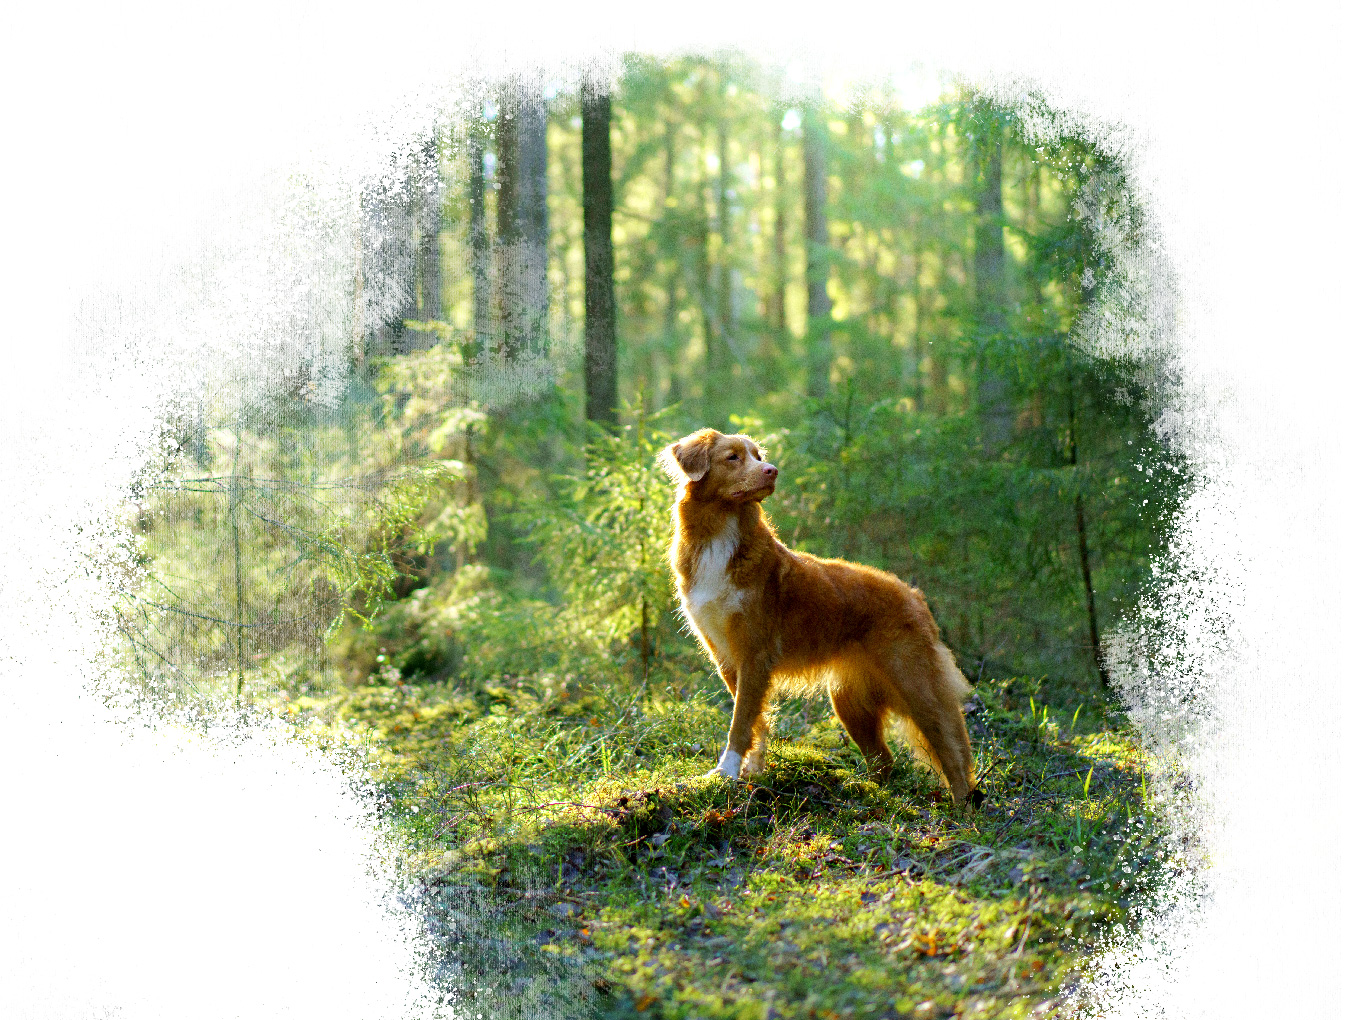 Naturally healthy, dog in forest